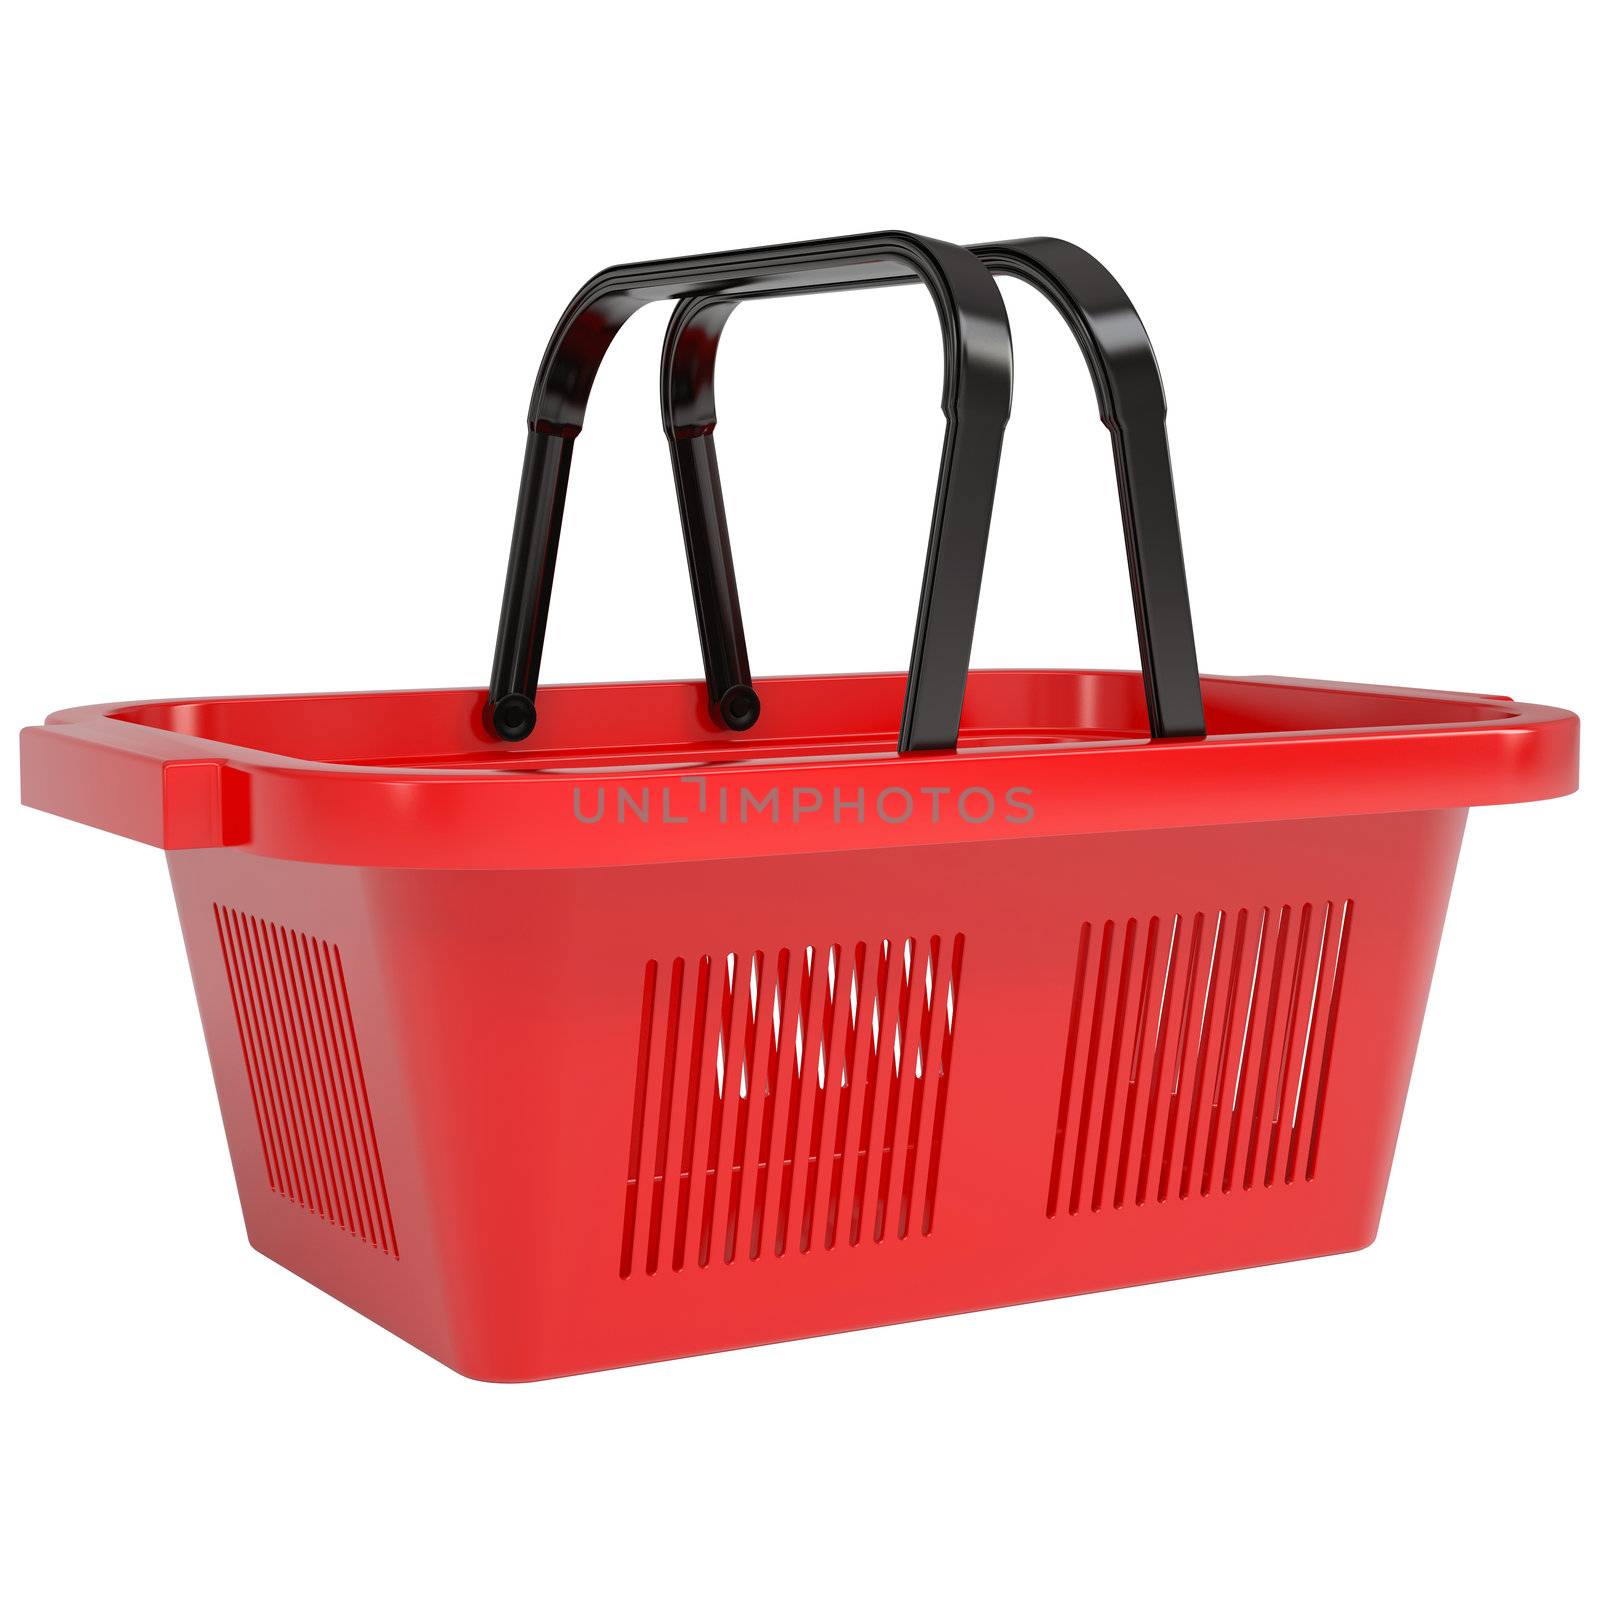 Red shopping basket by cherezoff